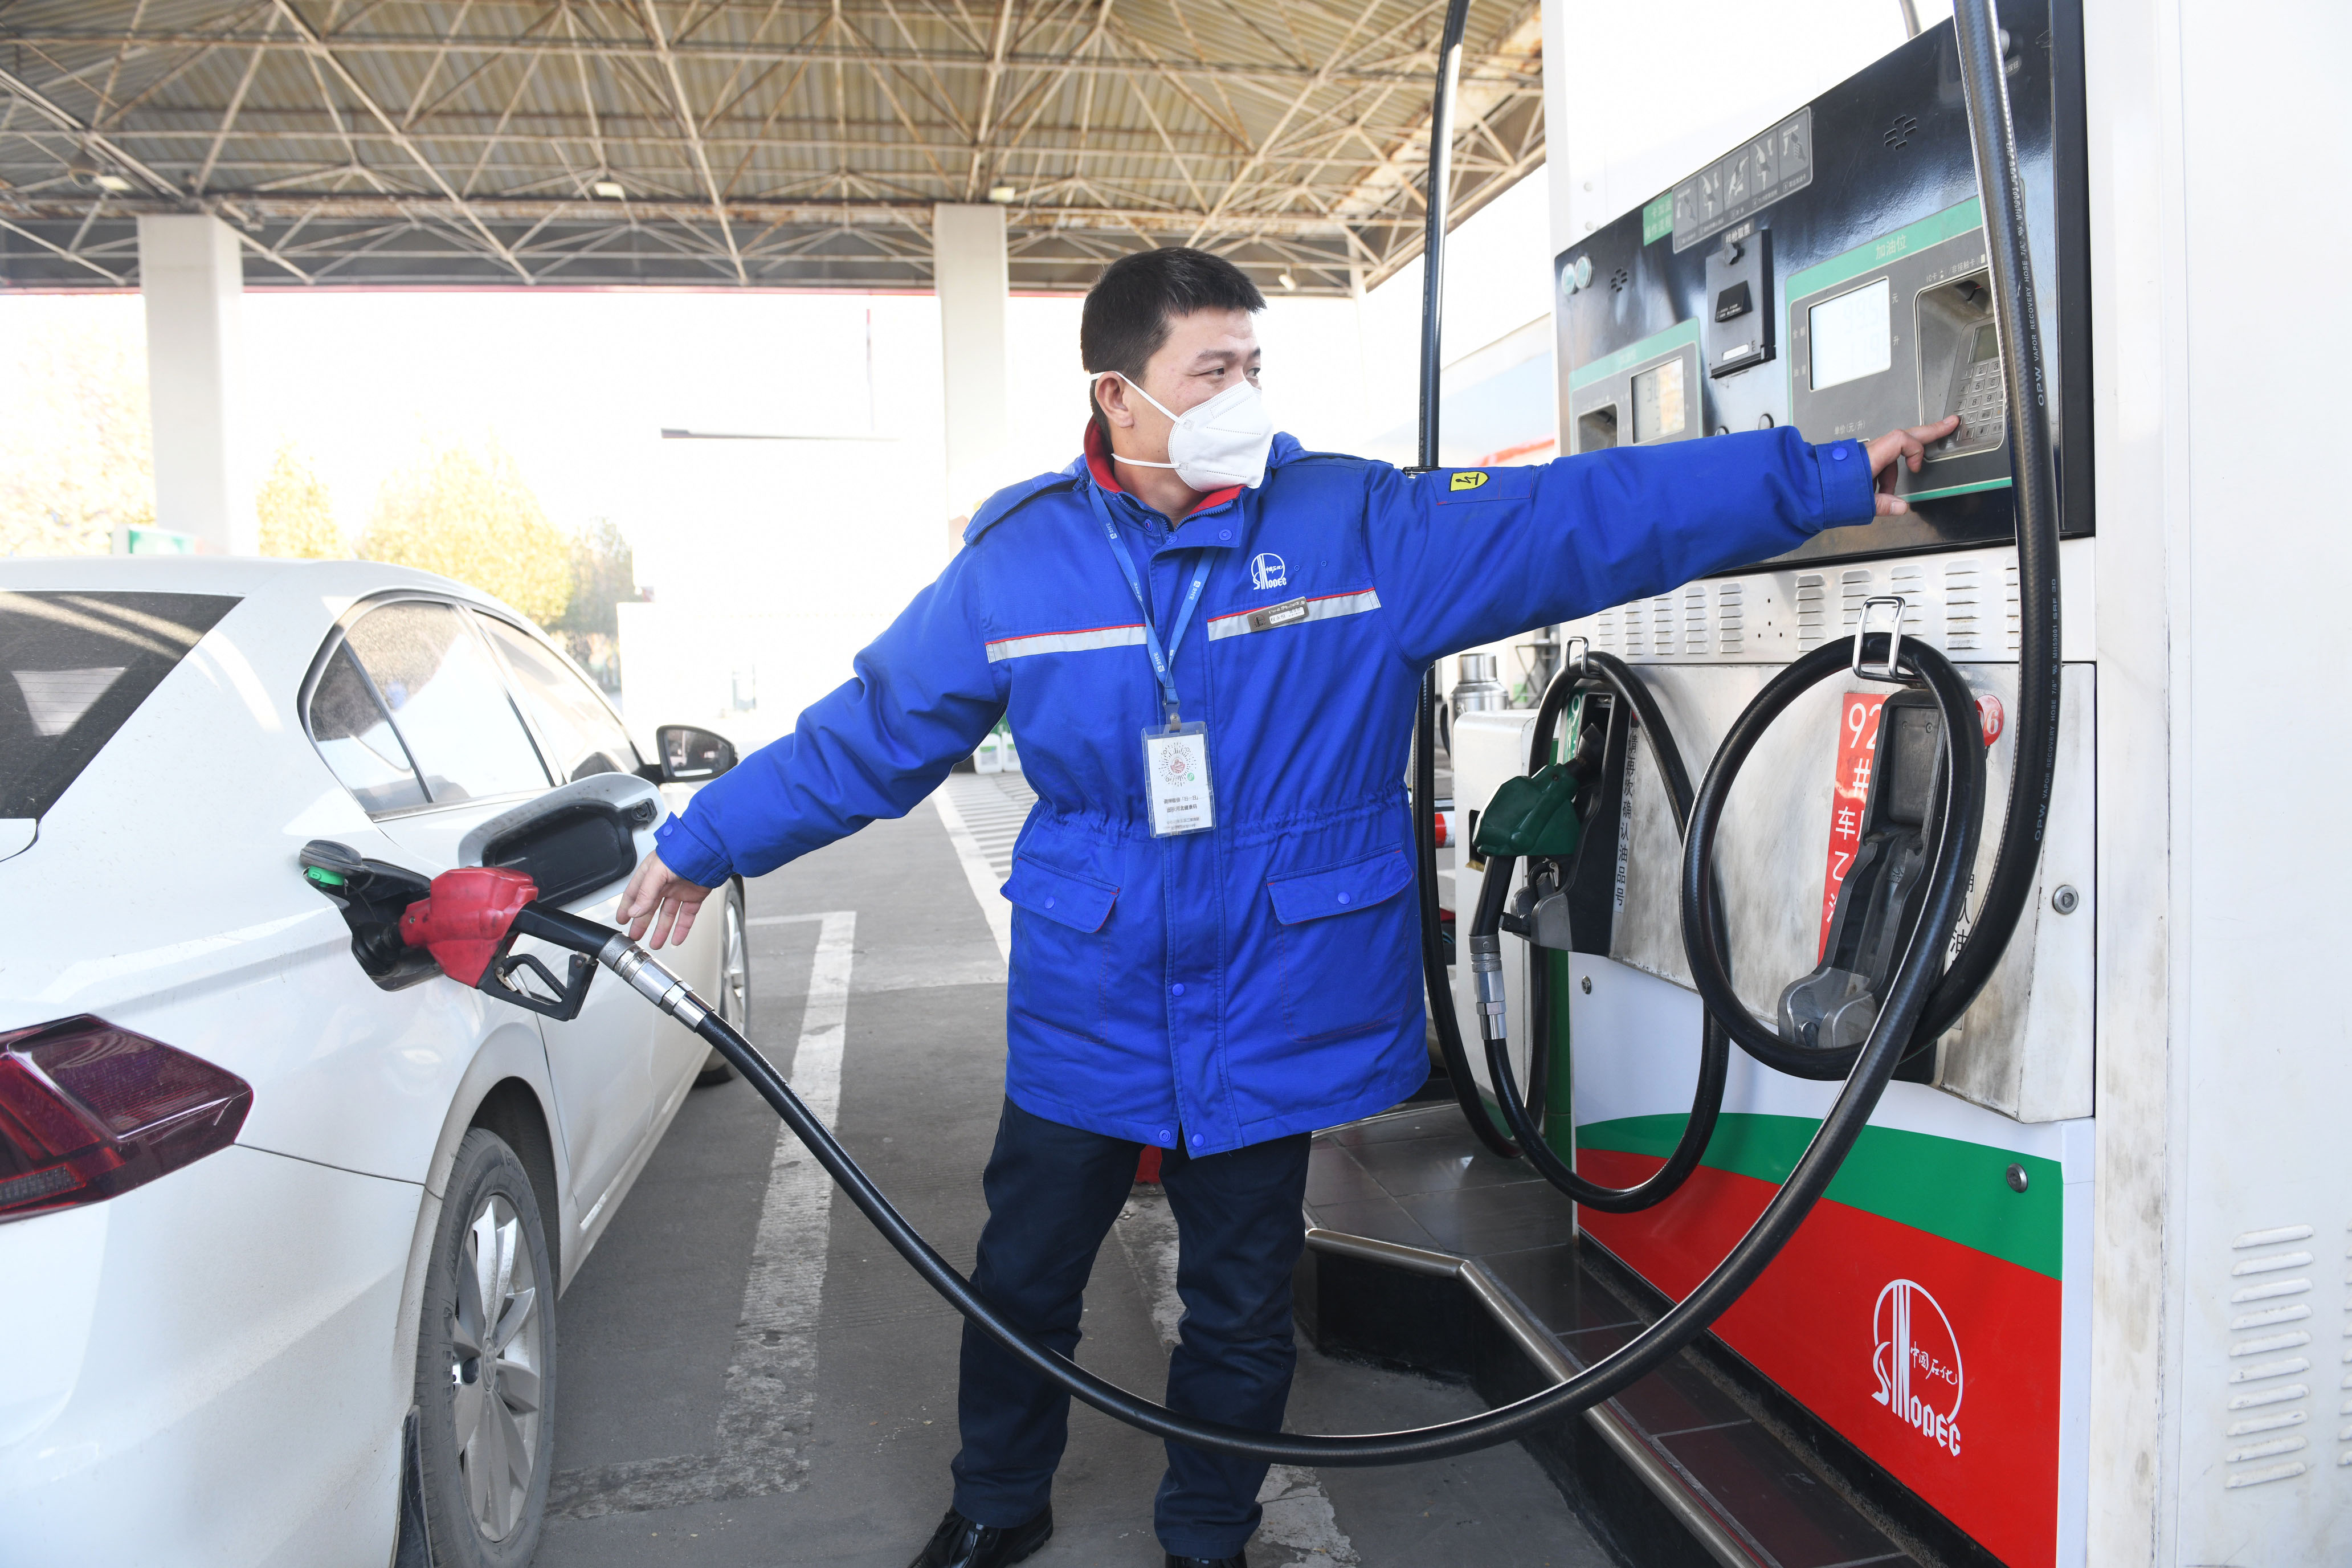 A worker refuels at a petrol station in Nanjing, East China’s Jiangsu Province on December 5, 2022. Starting from the same day, the retail price of gasoline and diesel will be cut by 440 yuan ($63) and 425 yuan per ton, China’s economic planner announced. 